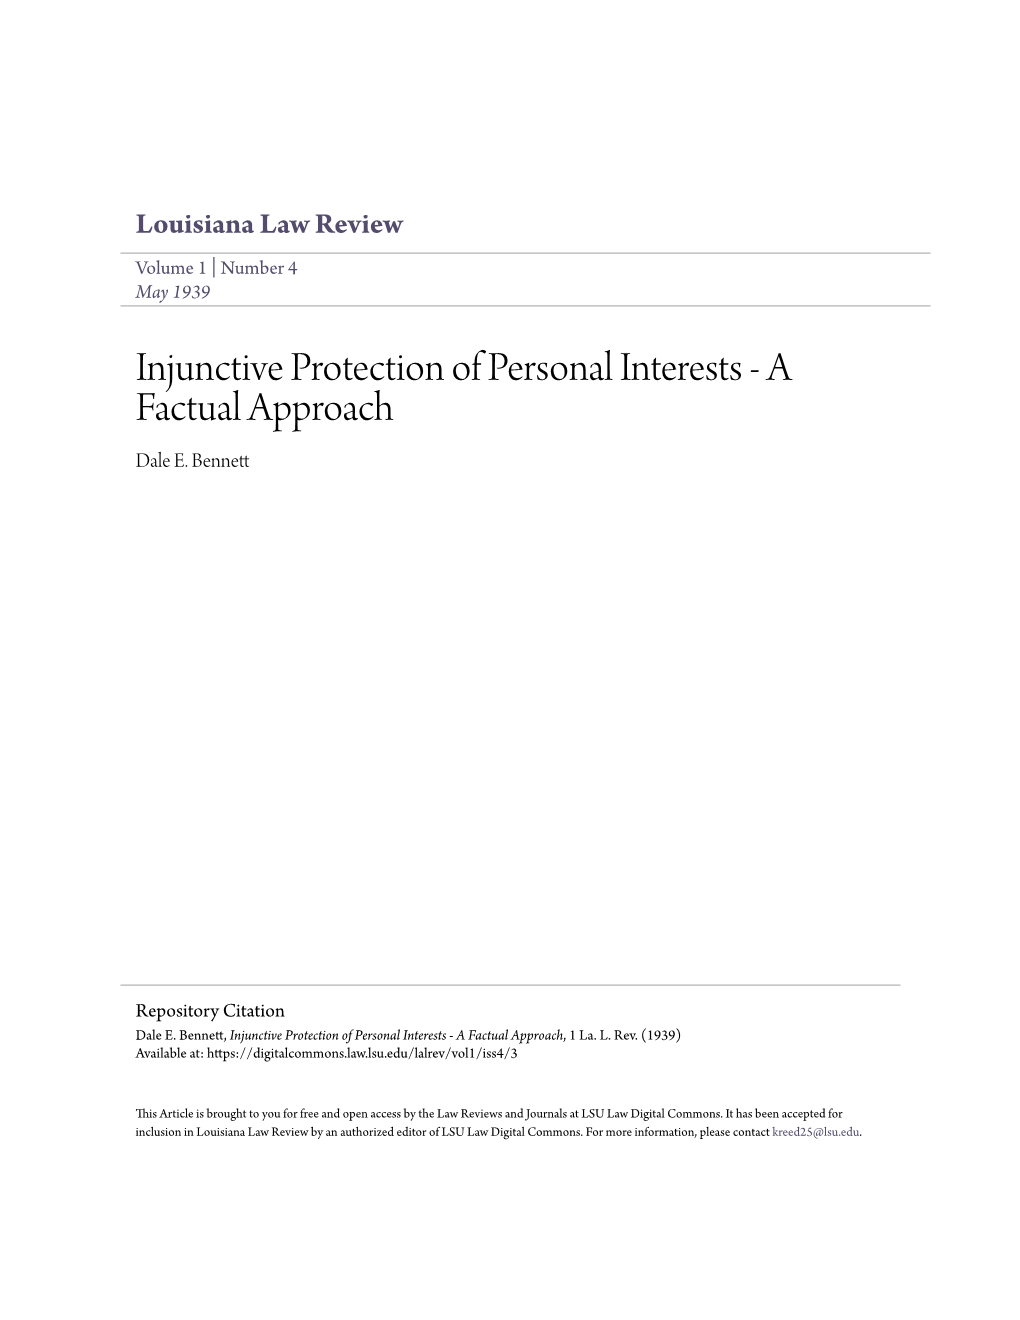 Injunctive Protection of Personal Interests - a Factual Approach Dale E